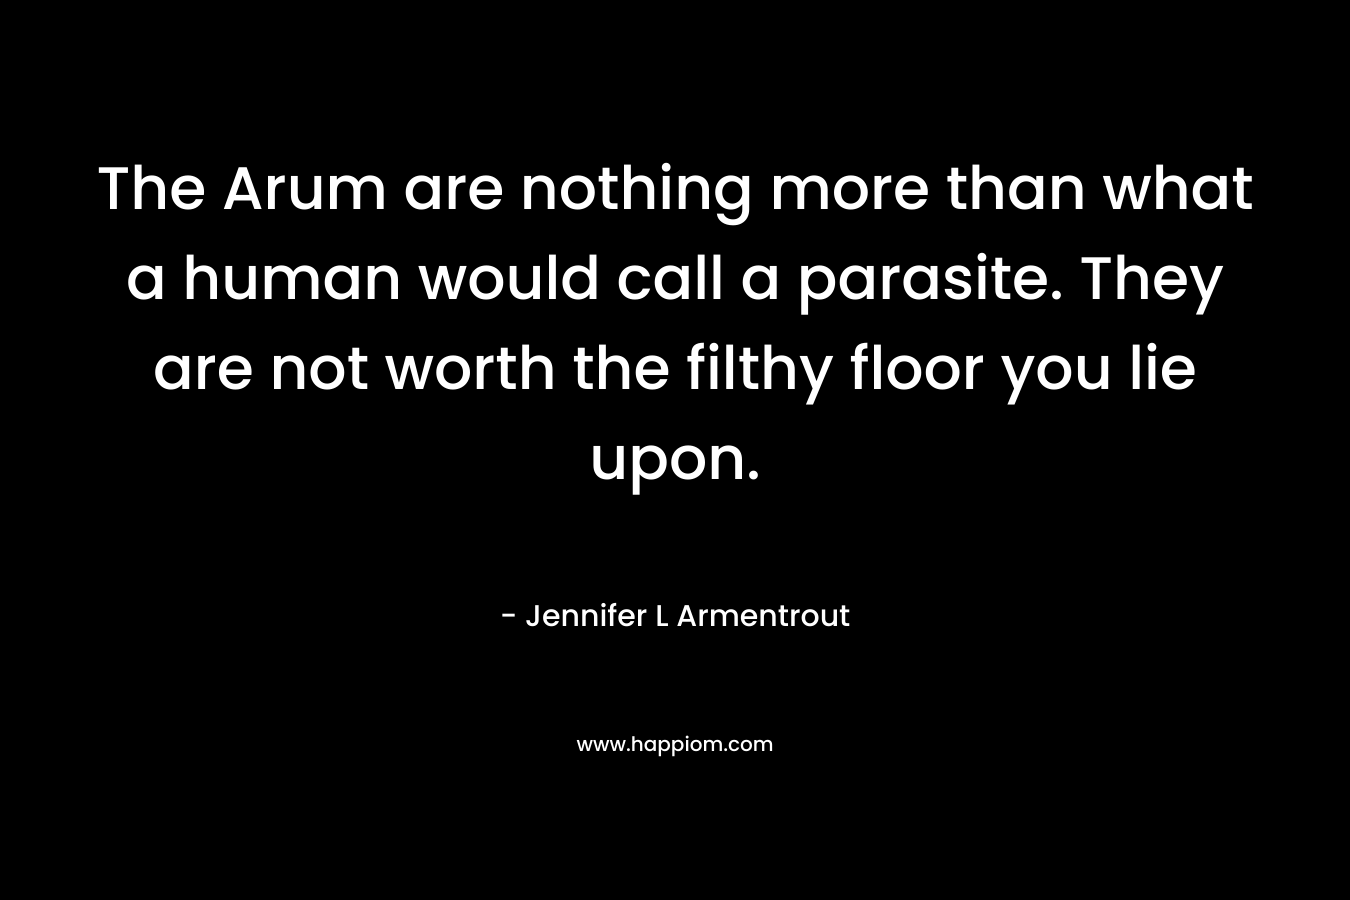 The Arum are nothing more than what a human would call a parasite. They are not worth the filthy floor you lie upon.